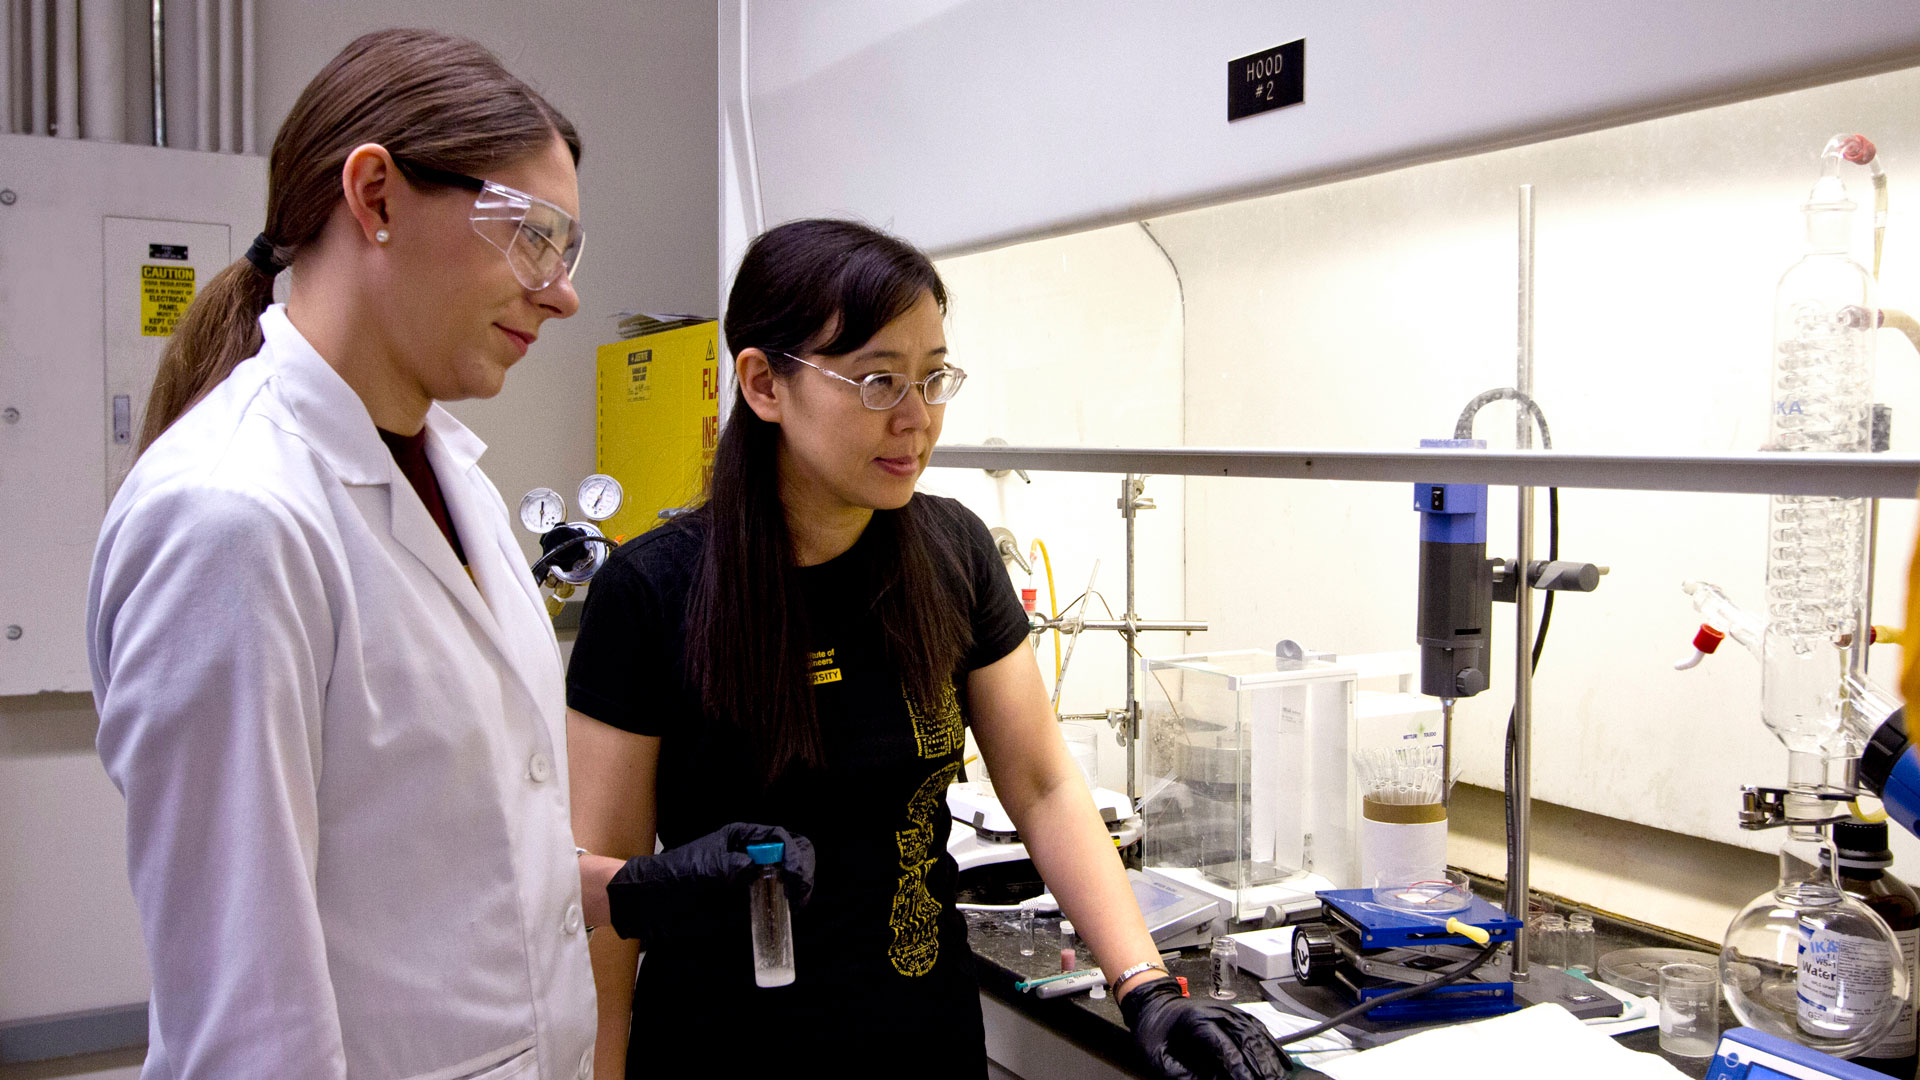 Two women stand in a research lab. One, on the right, advises the one on the left, a doctoral student wearing protective lab gear.